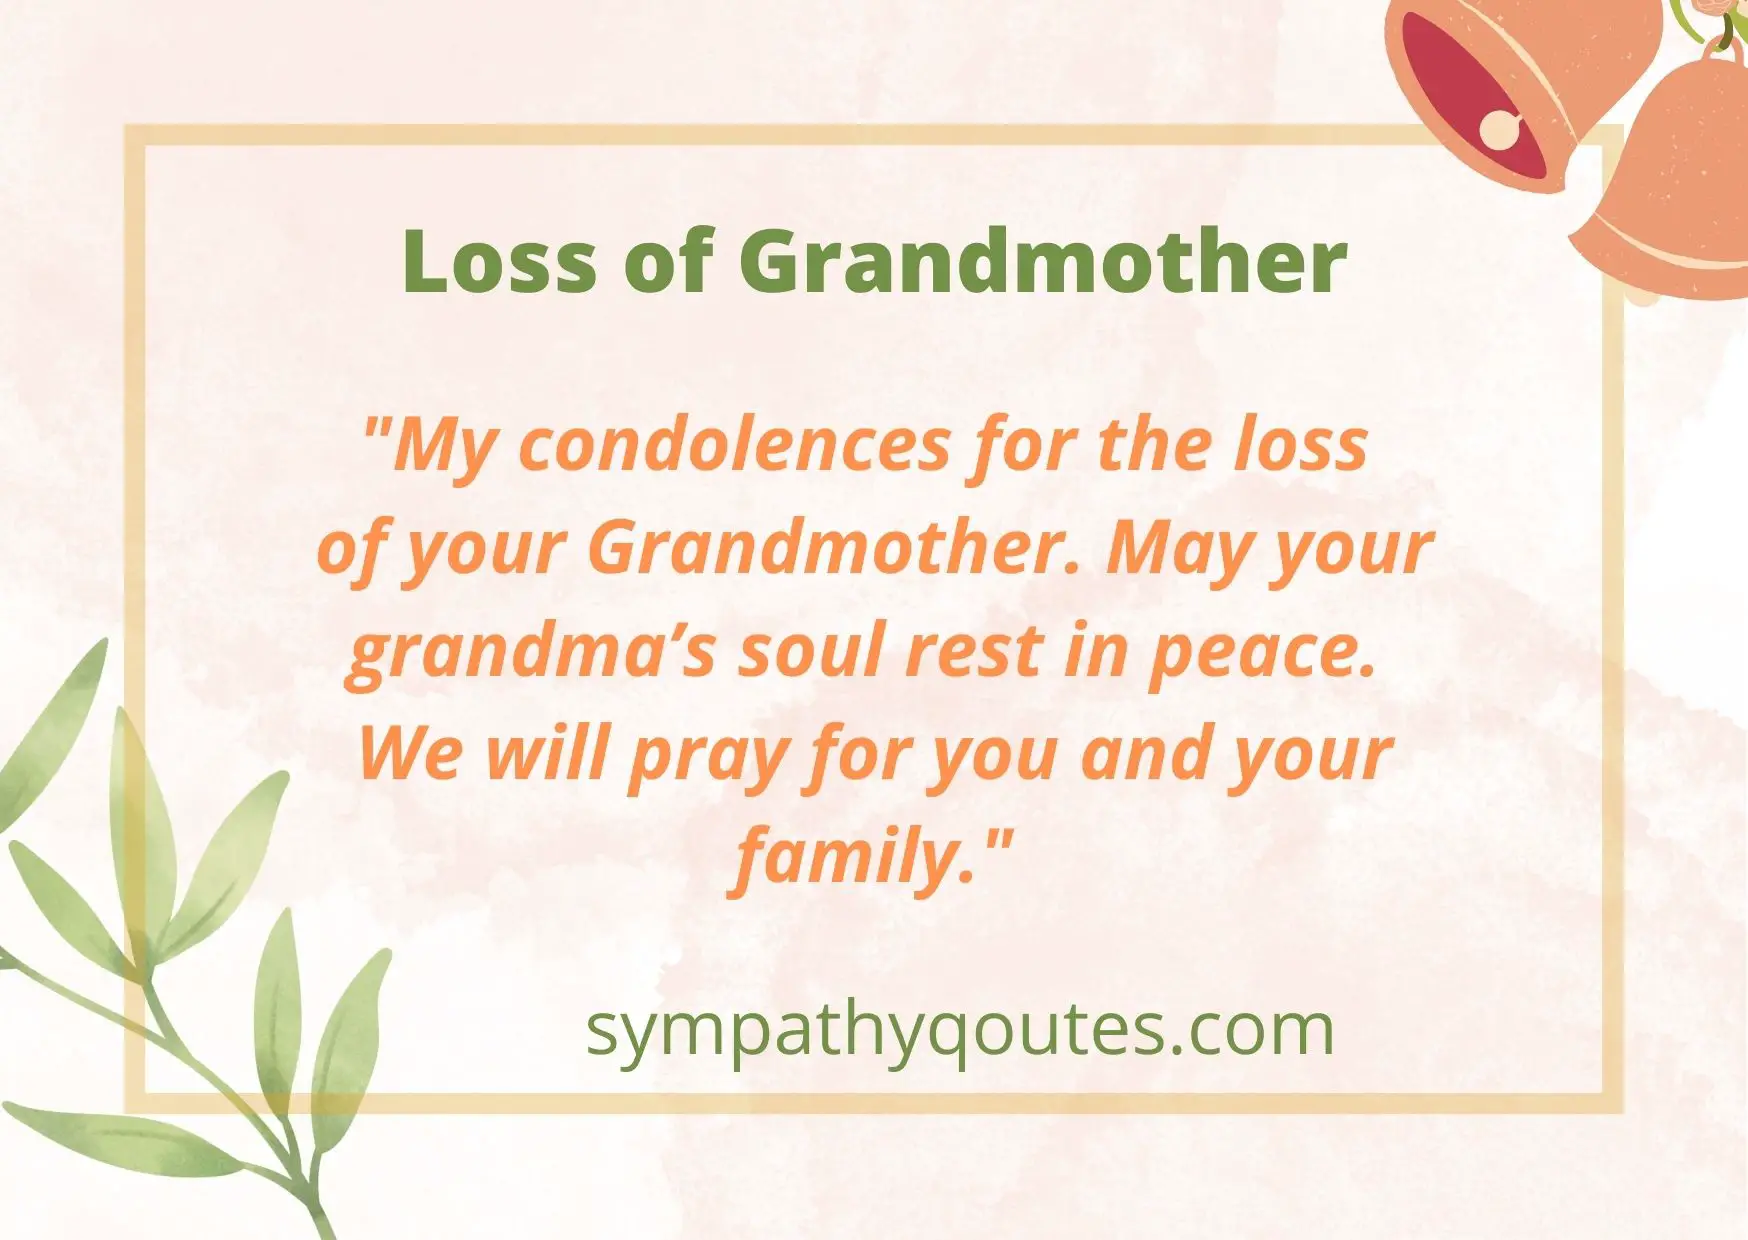  Sympathy Quotes for Loss of Grandmother